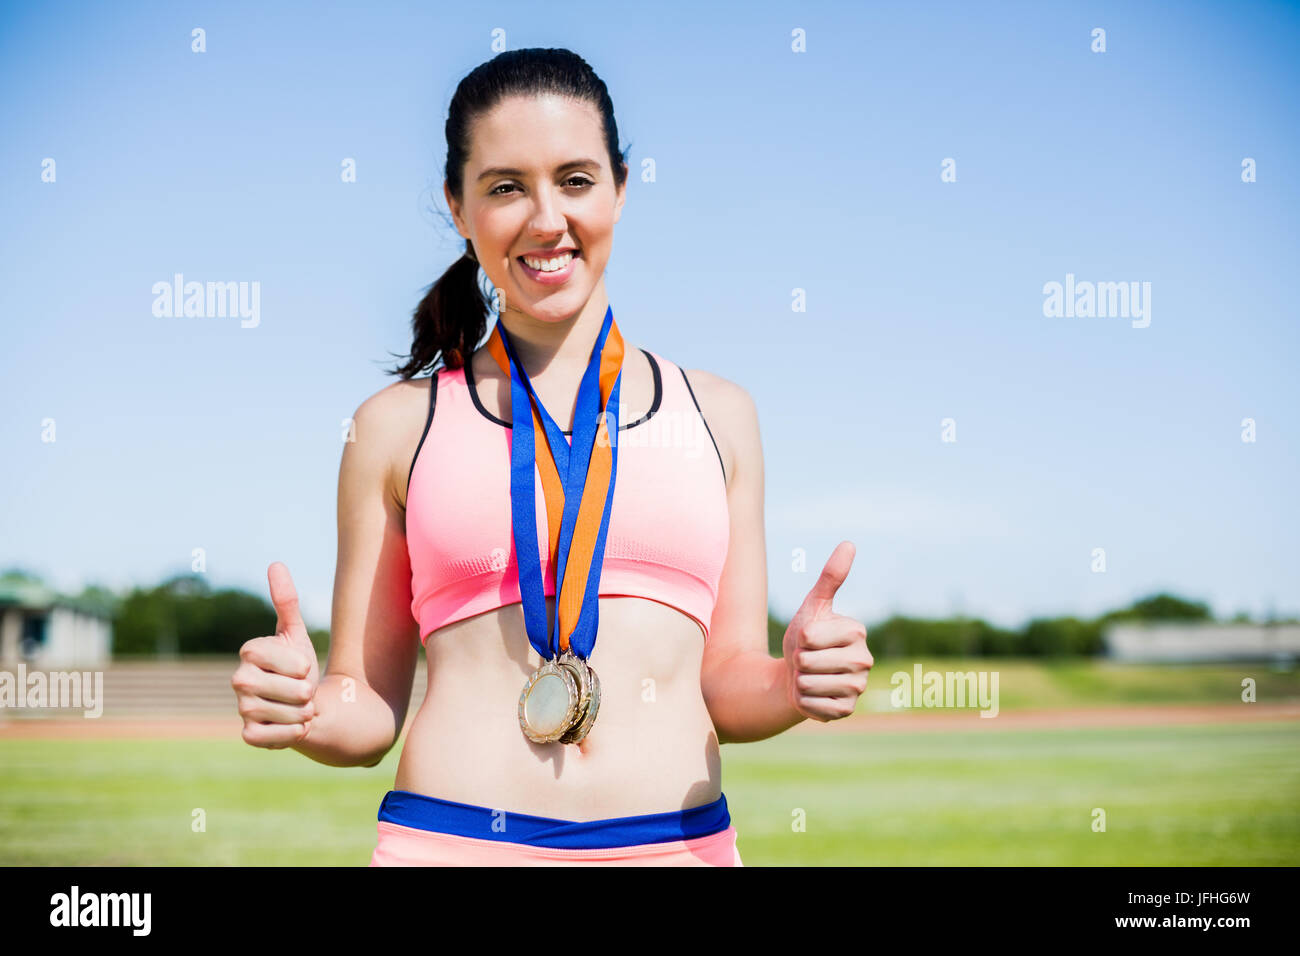 Female athlete with gold medals around her neck Stock Photo